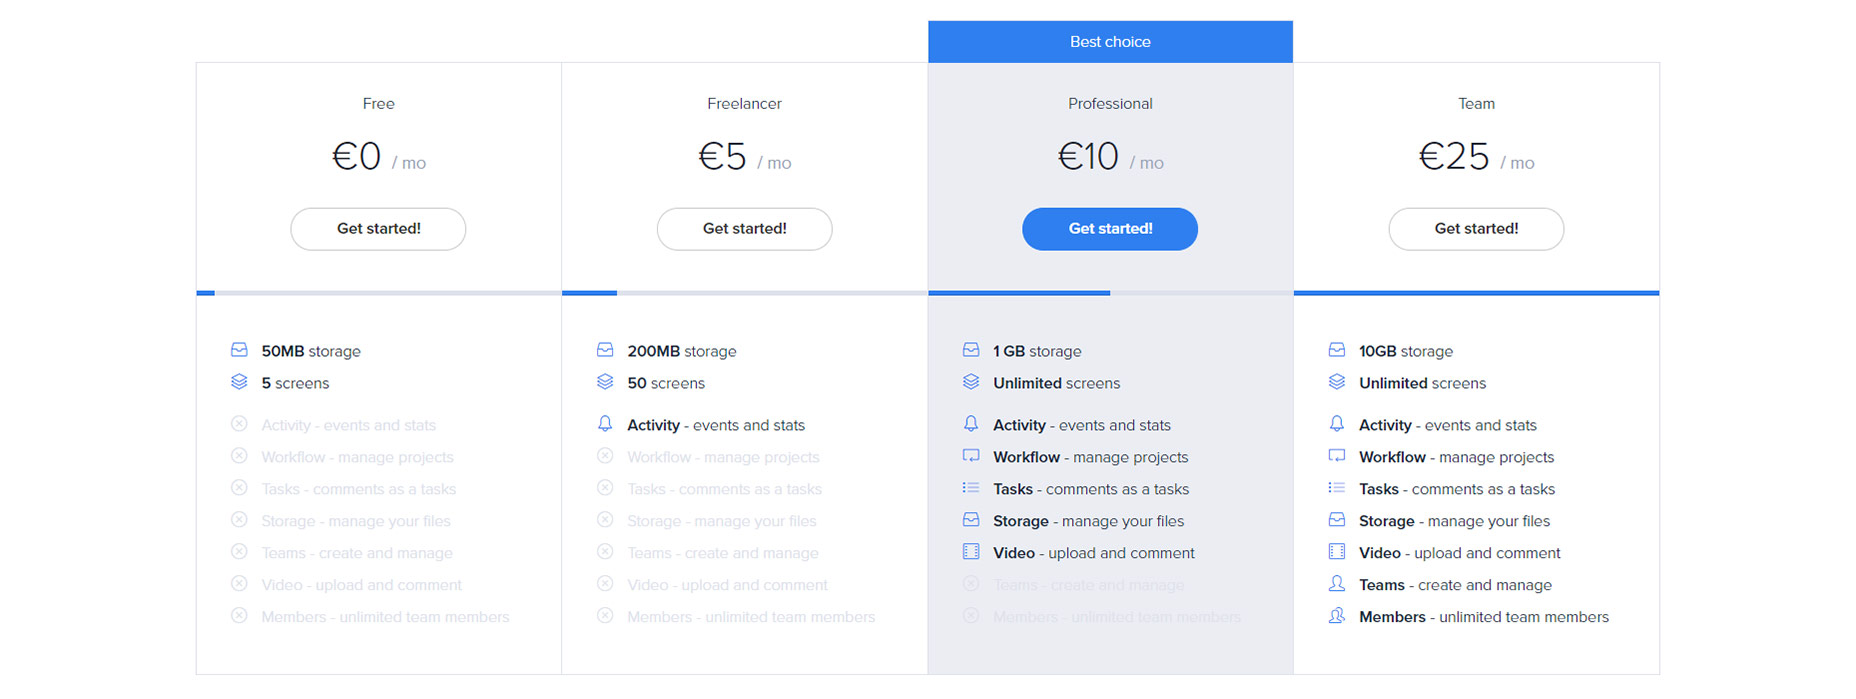 03-symu-pricing-table-greyed-text